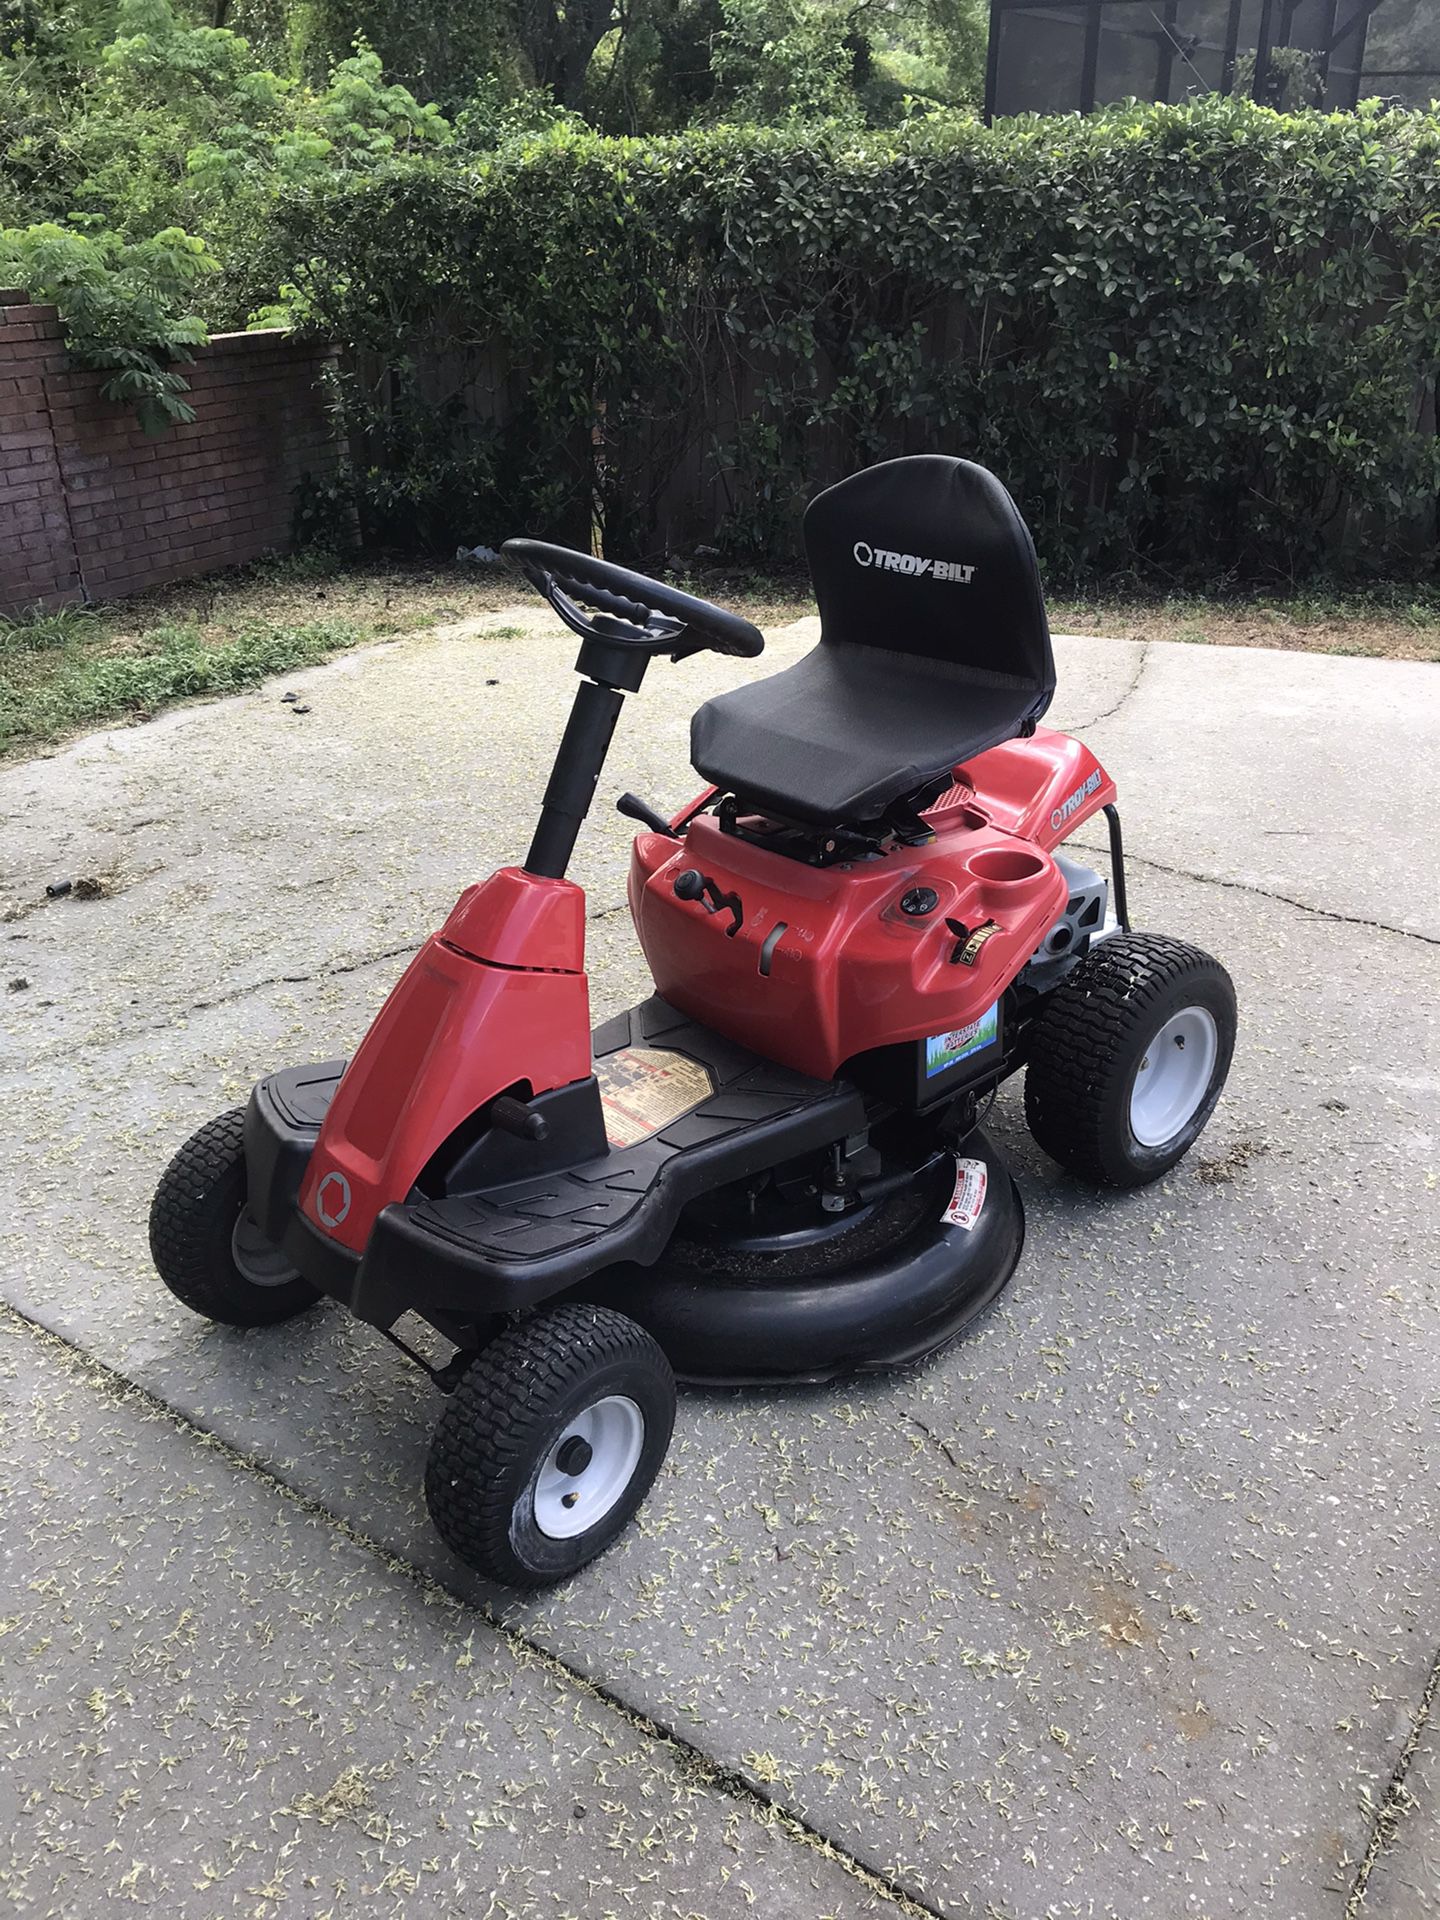 GOOD CONDITION TROYBILT TRACTOR 30 INCH RIDING LAWN MOWER